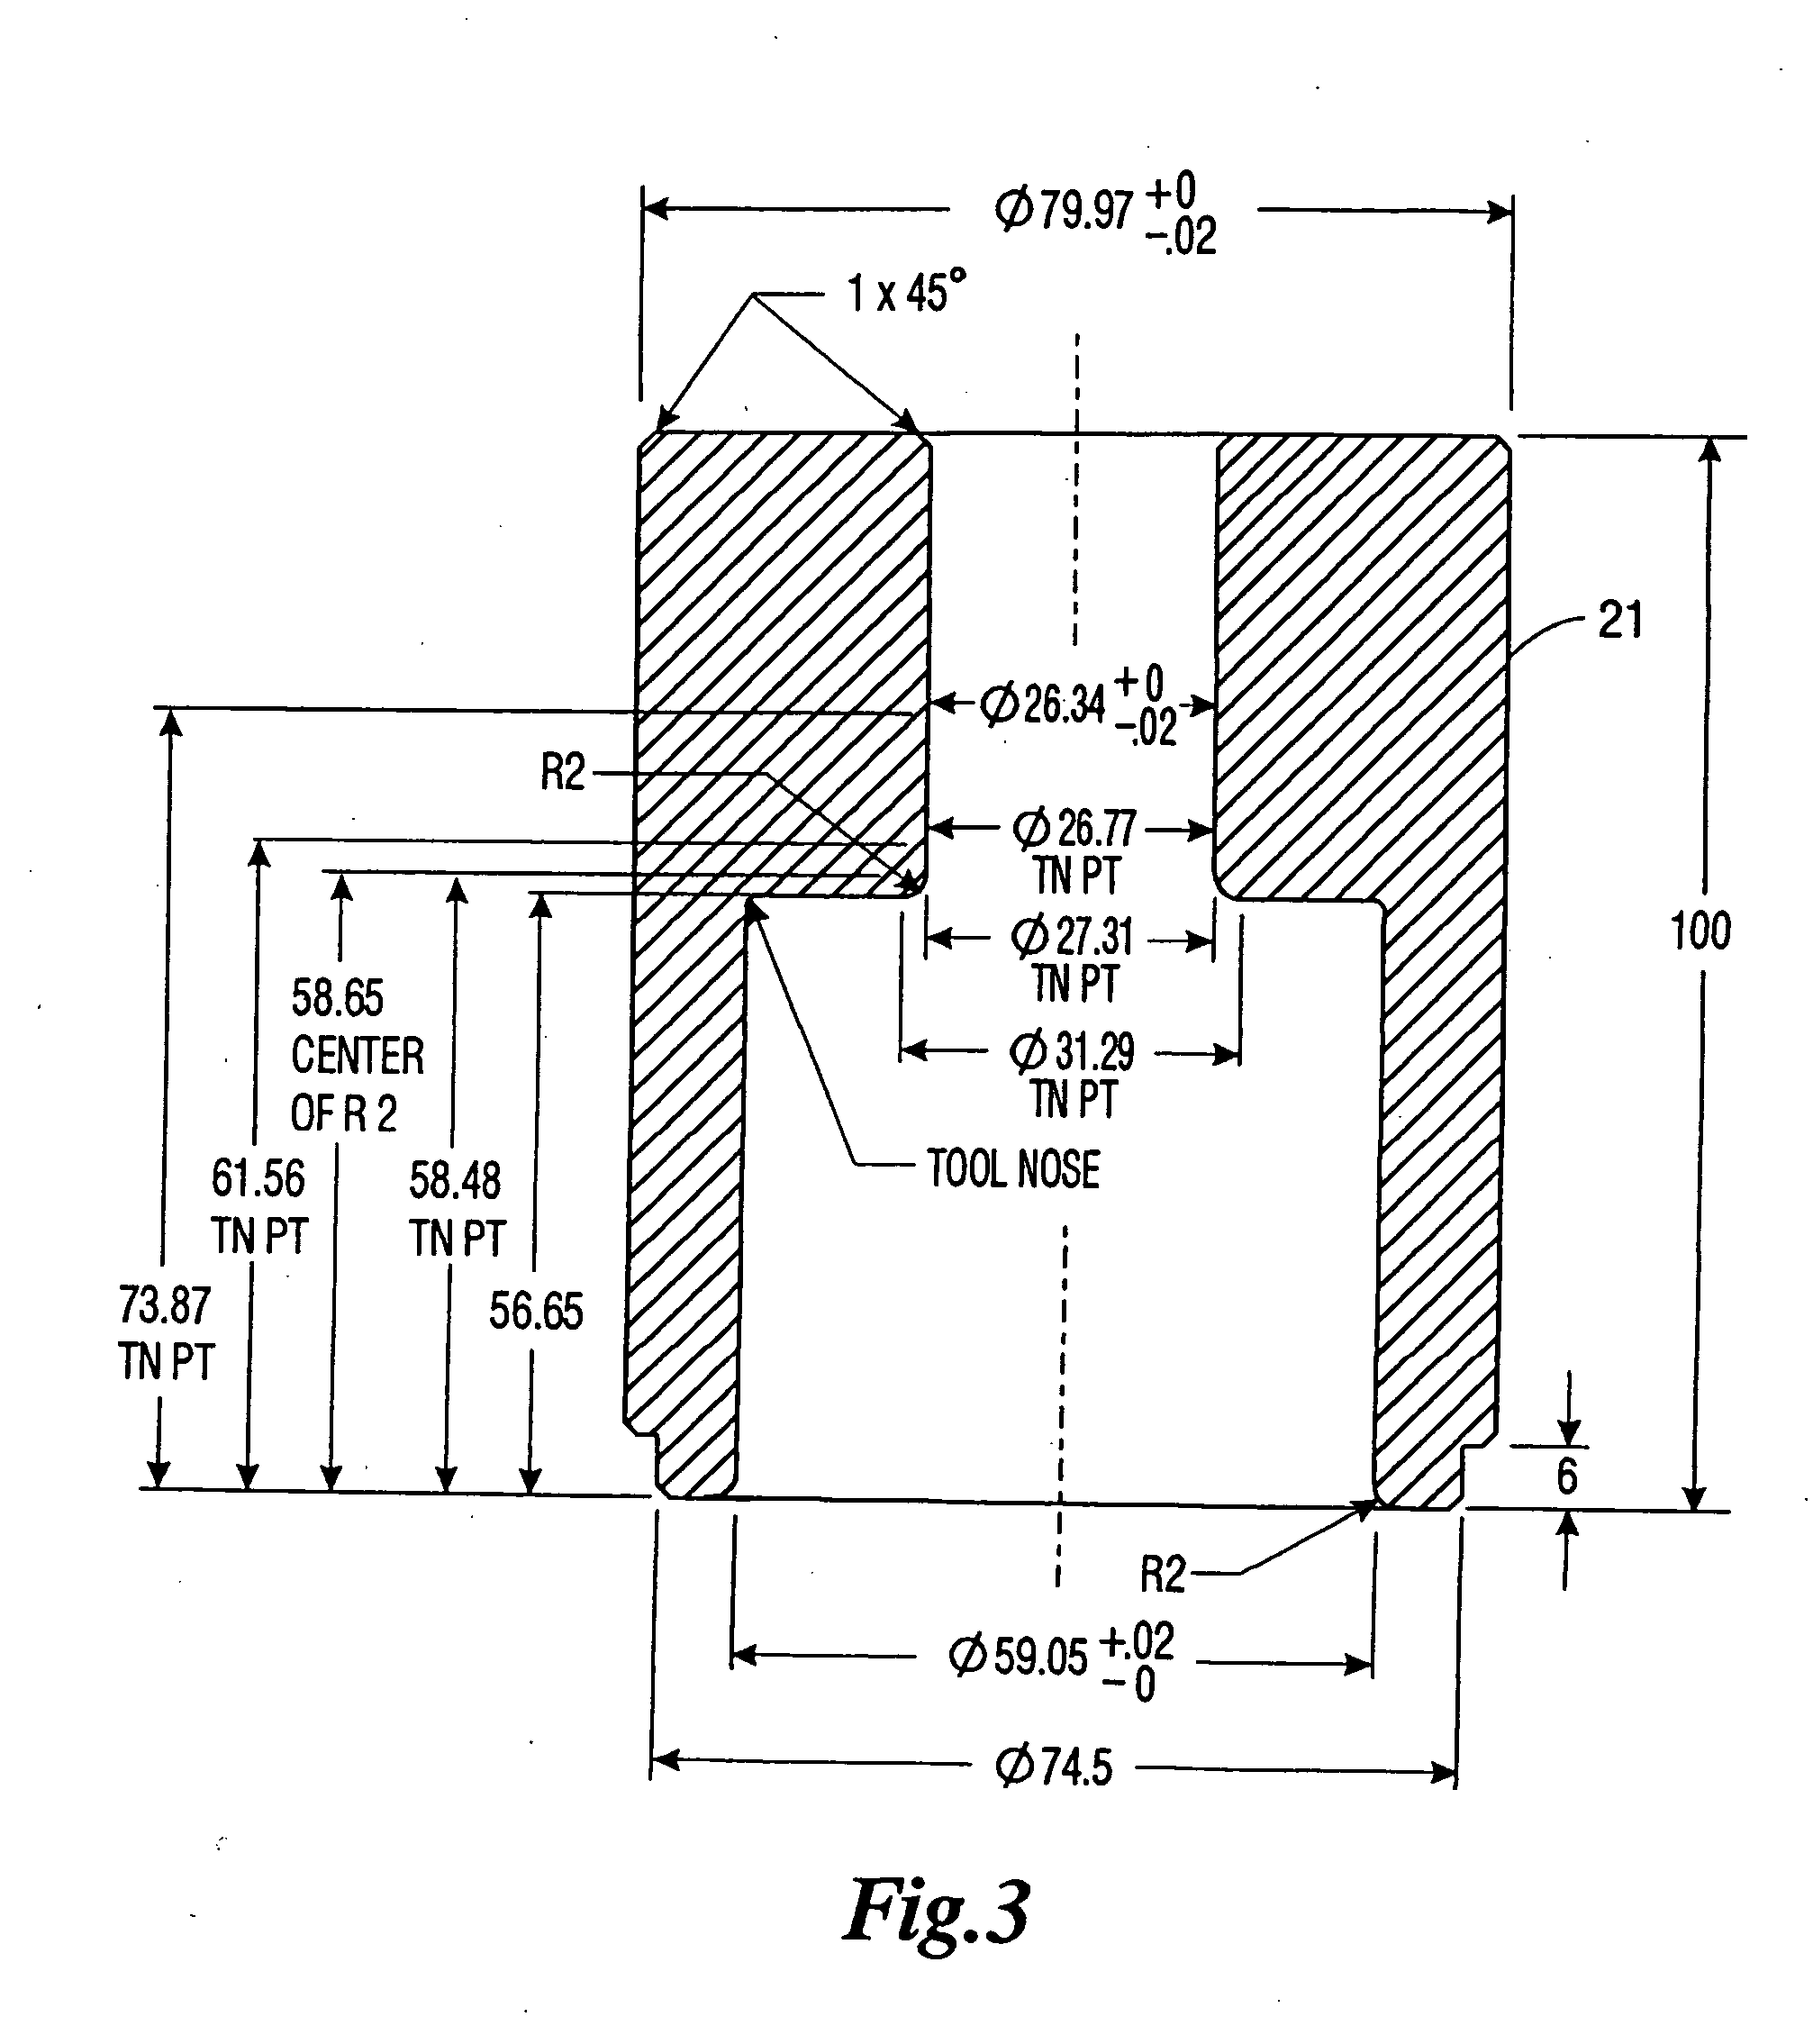 Method of manufacturing an aluminum receptacle with threaded outsert